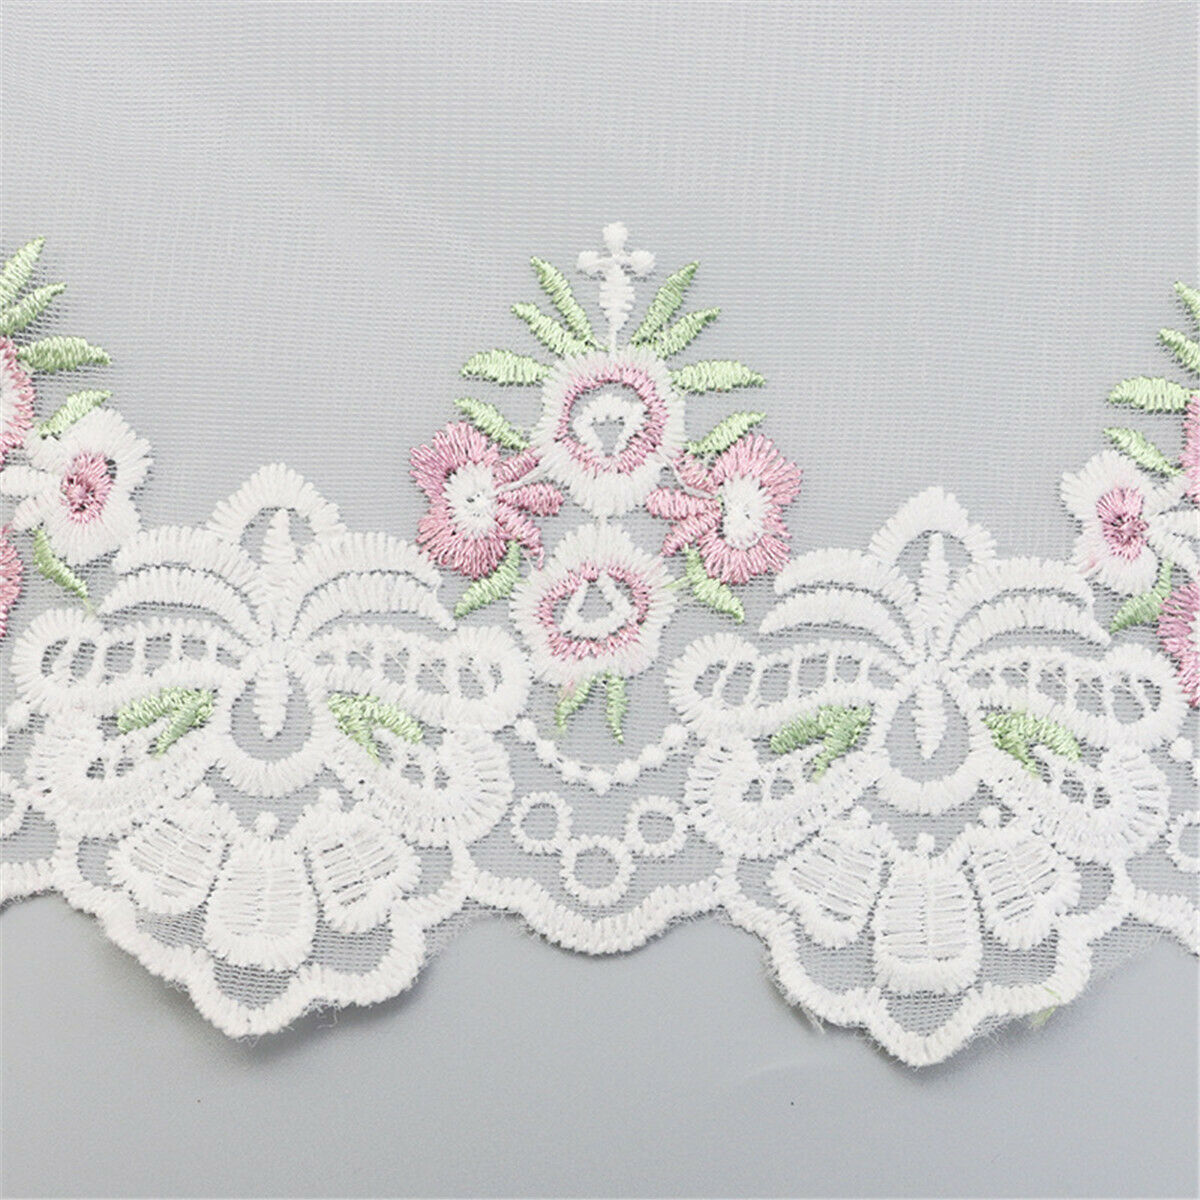 1 Yd Floral Embroidery Cotton Lace Trim Ribbon Fabric Craft Sewing Applique DIY